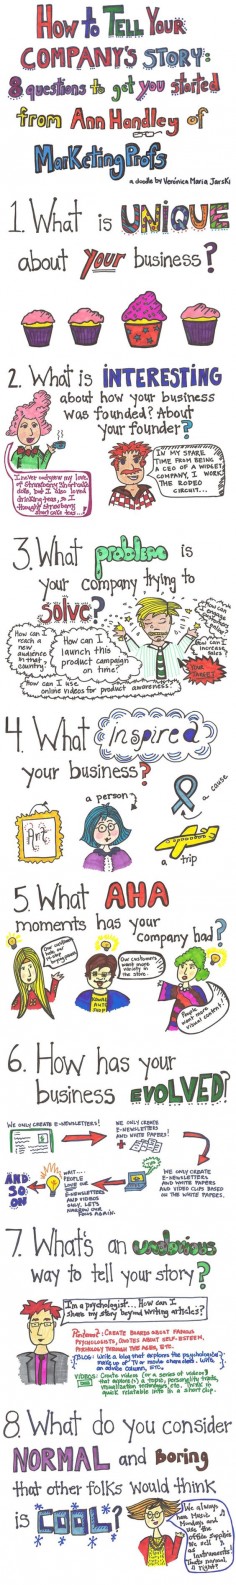 Infographic - Tips for Corporate Storytelling